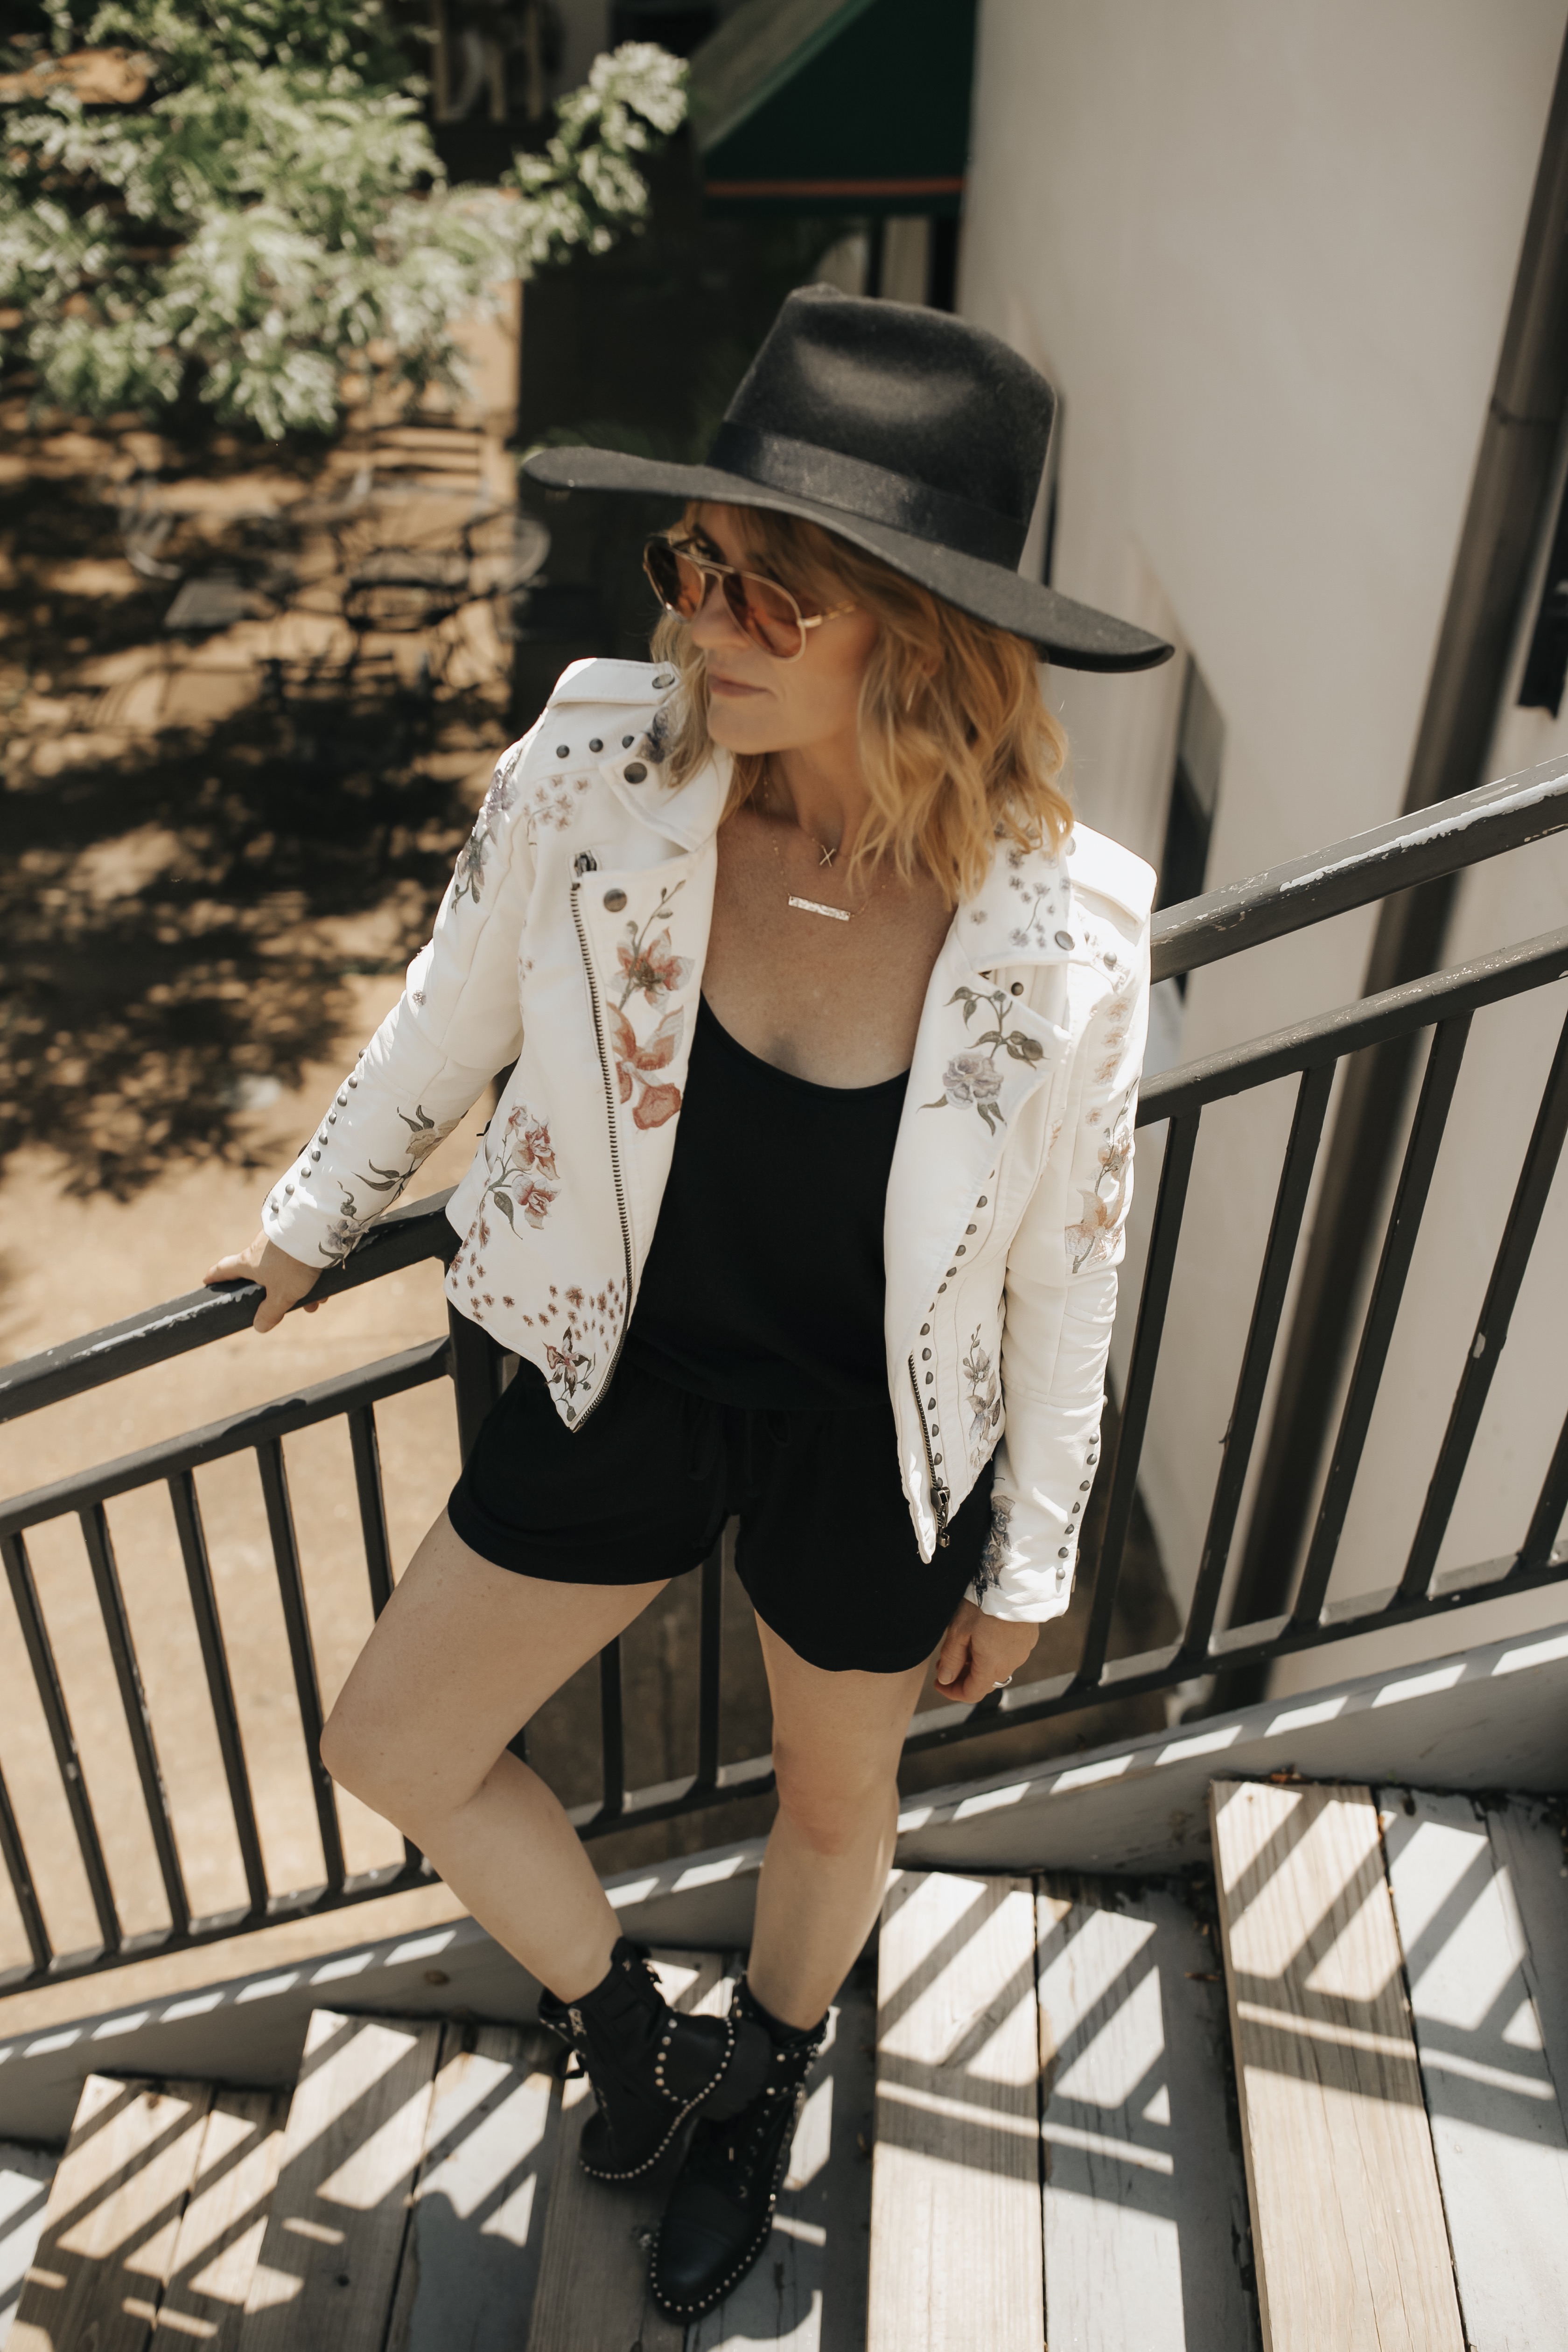 How To Style A Romper 5 Different Ways | Moto jacket outfit spring | Moto jacket outfit black | Moto jacket outfit casual | how to style a romper outfits | how to wear a romper outfits | Oh Darling Blog 